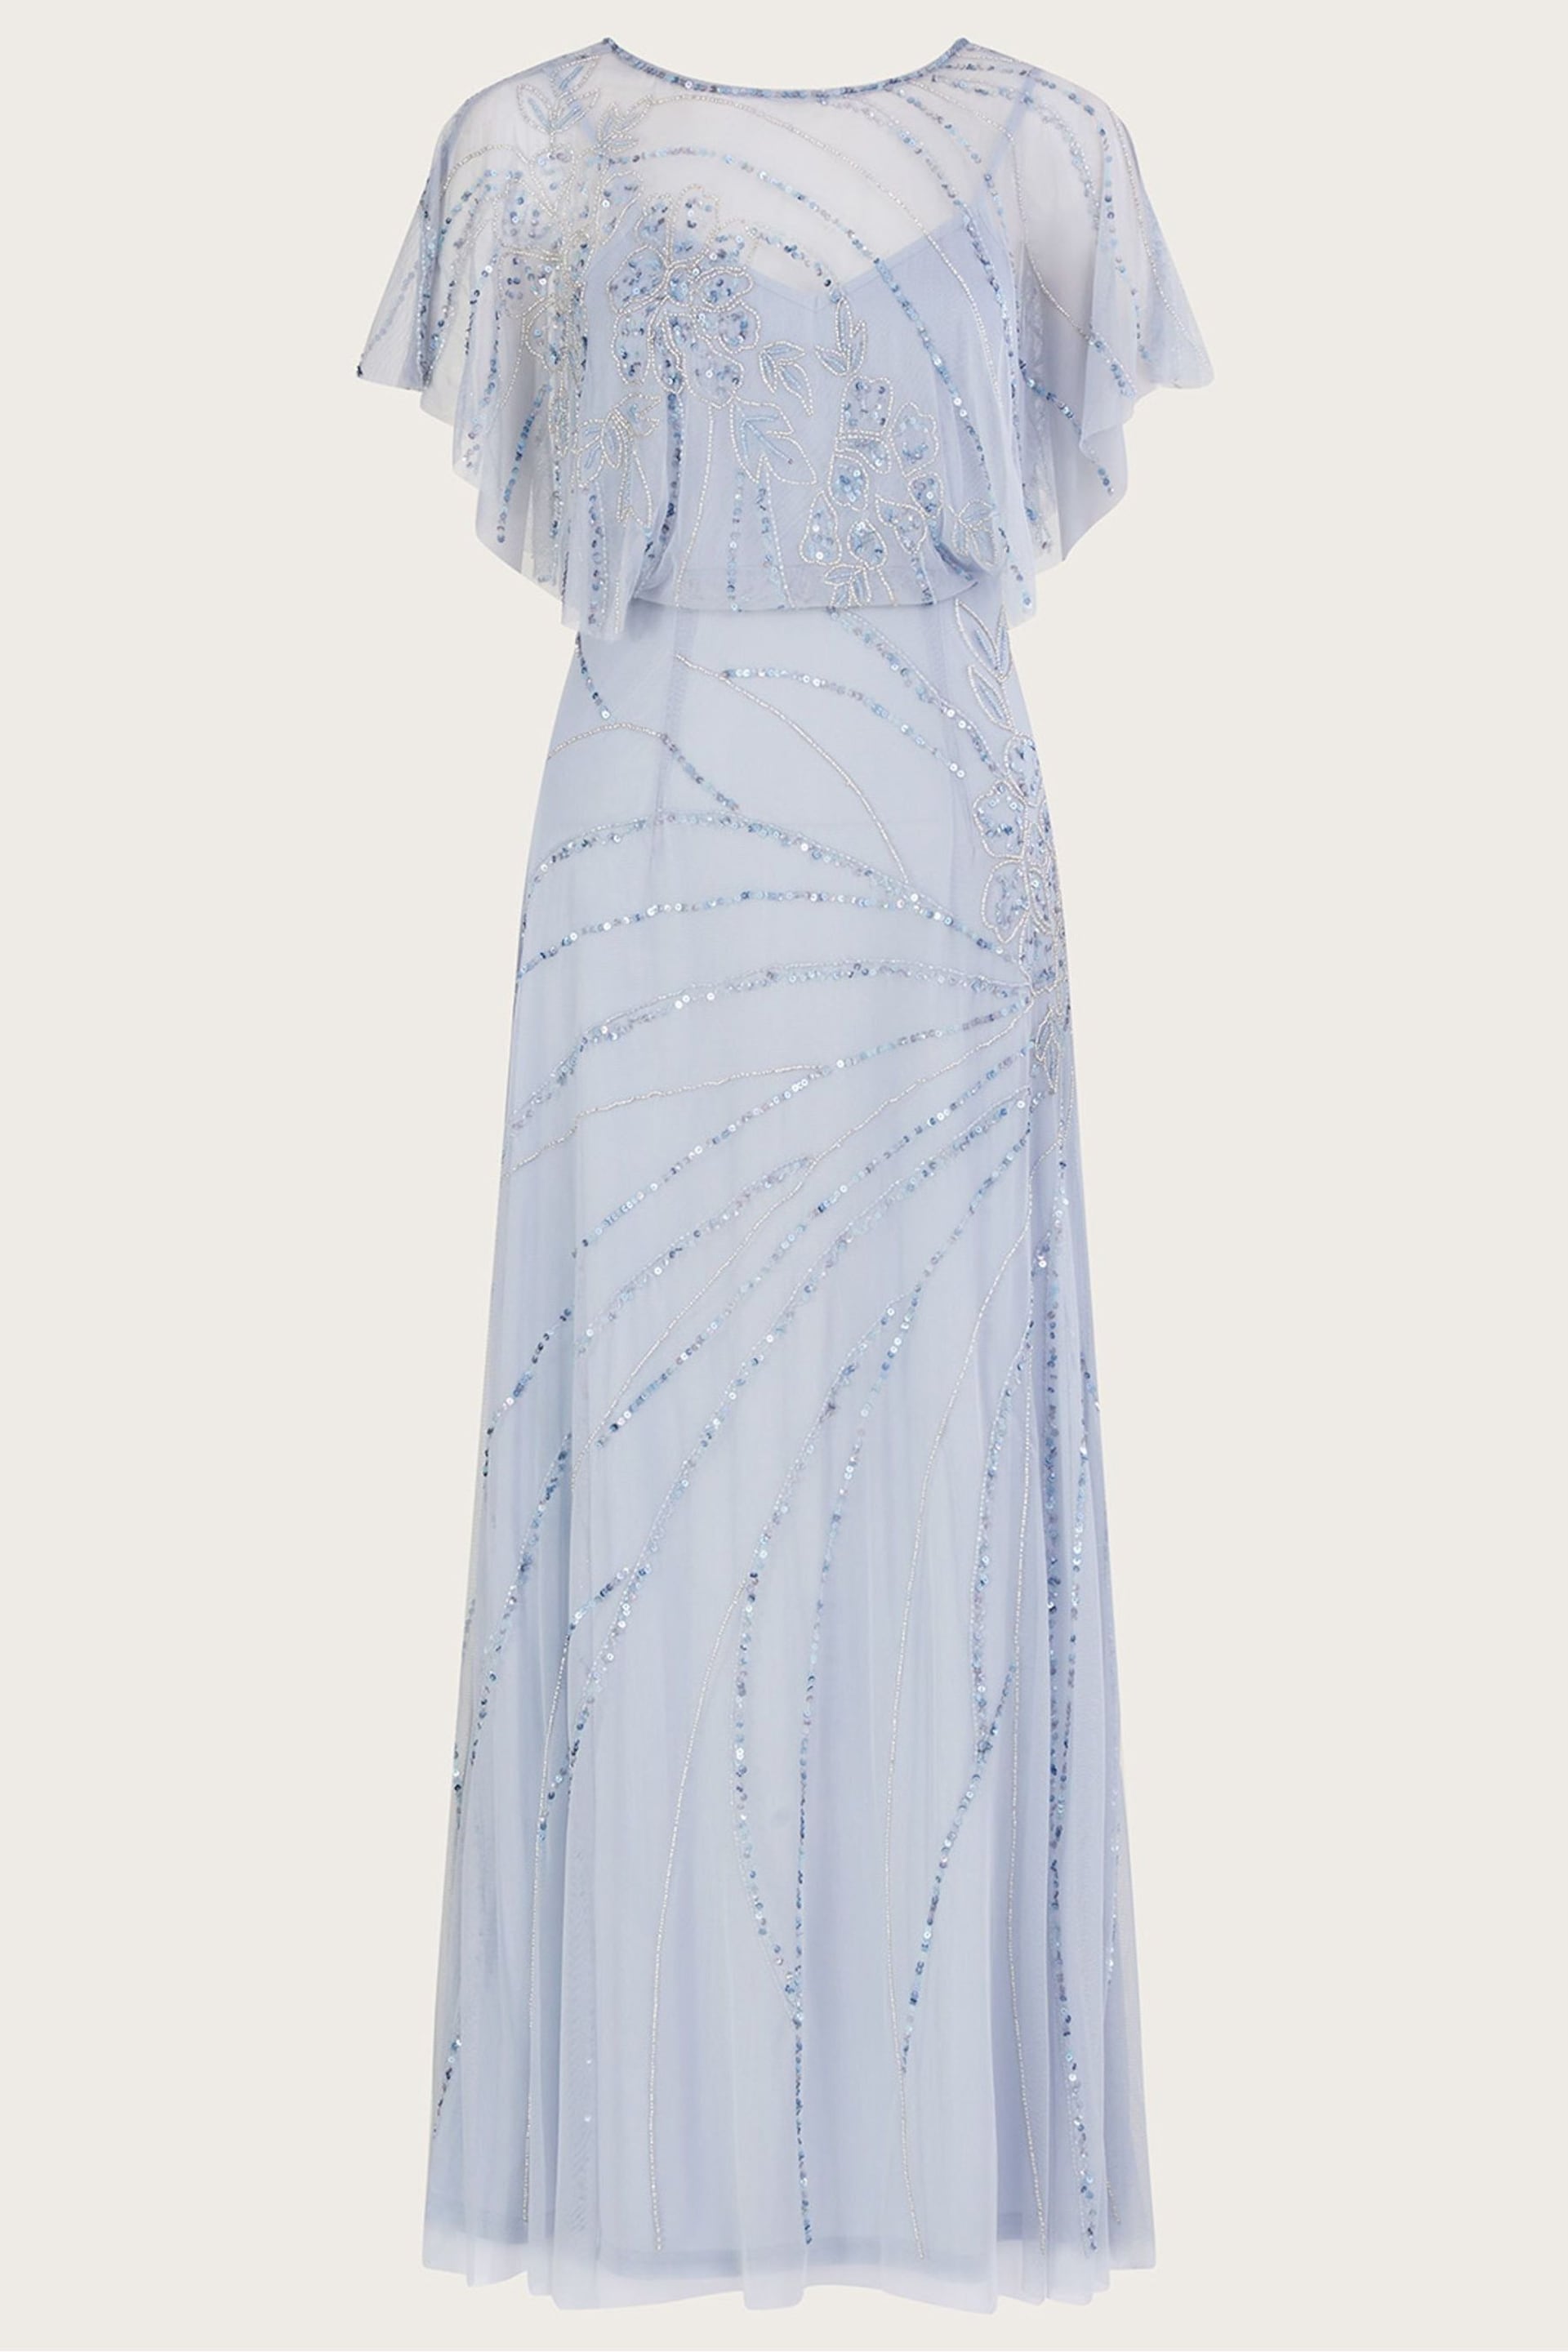 Monsoon Grey Sienna Sustainable Embroidered Maxi Dress - Image 4 of 4